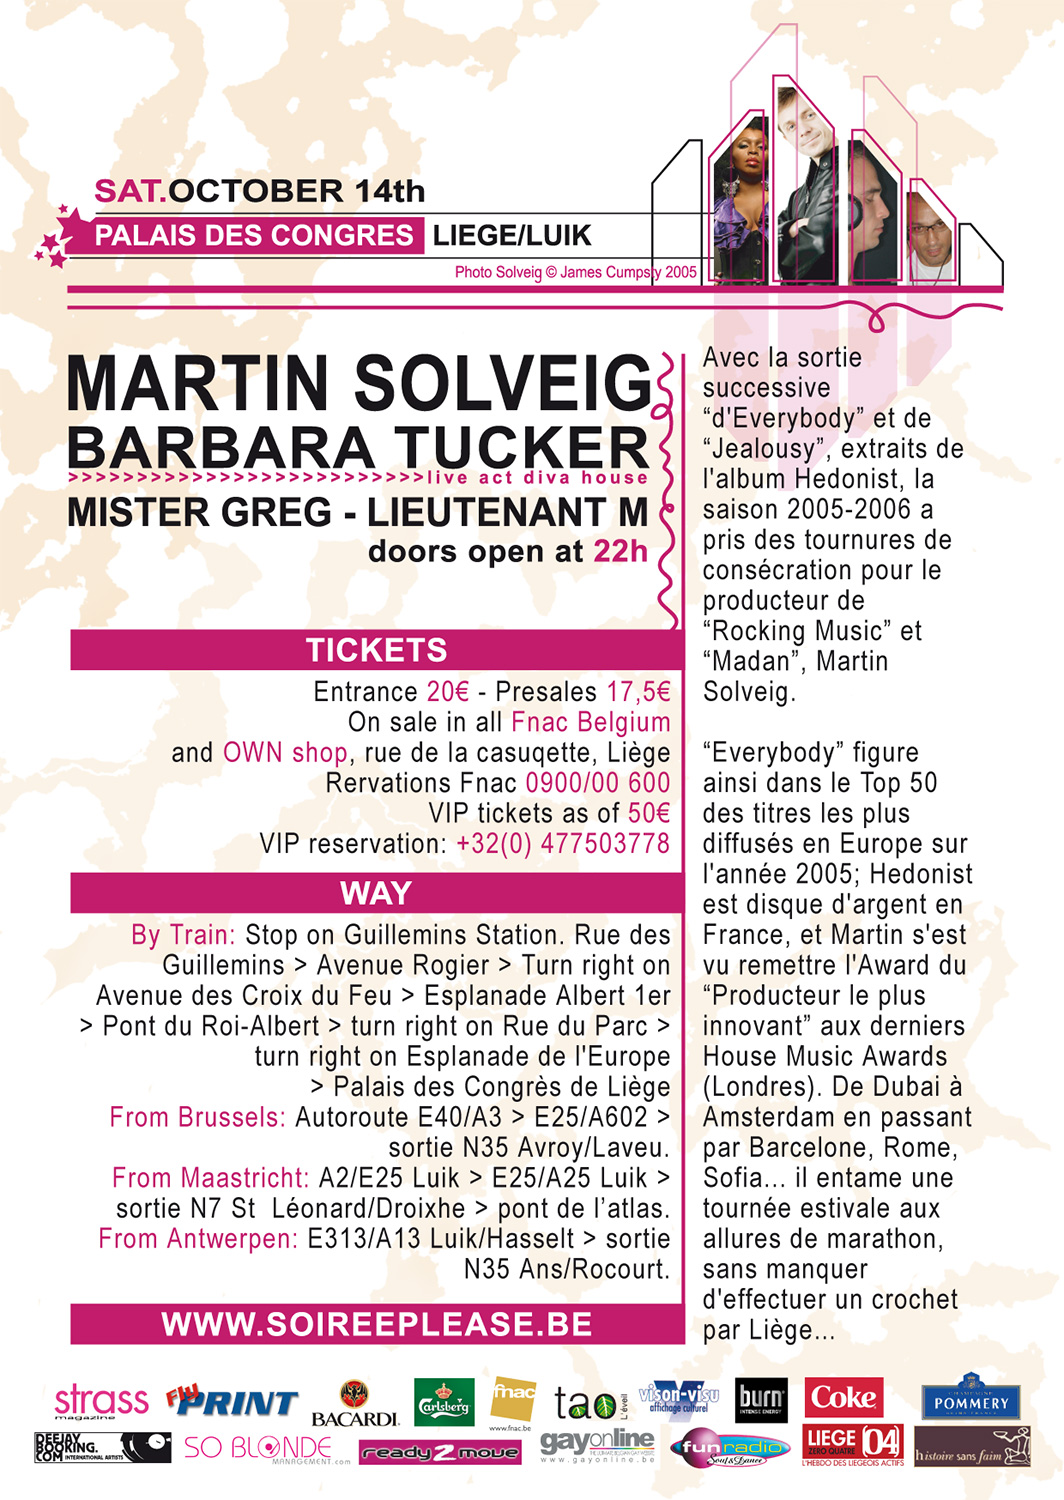 Rear flyer for an event with Martin Solveig and Barbara Tuck